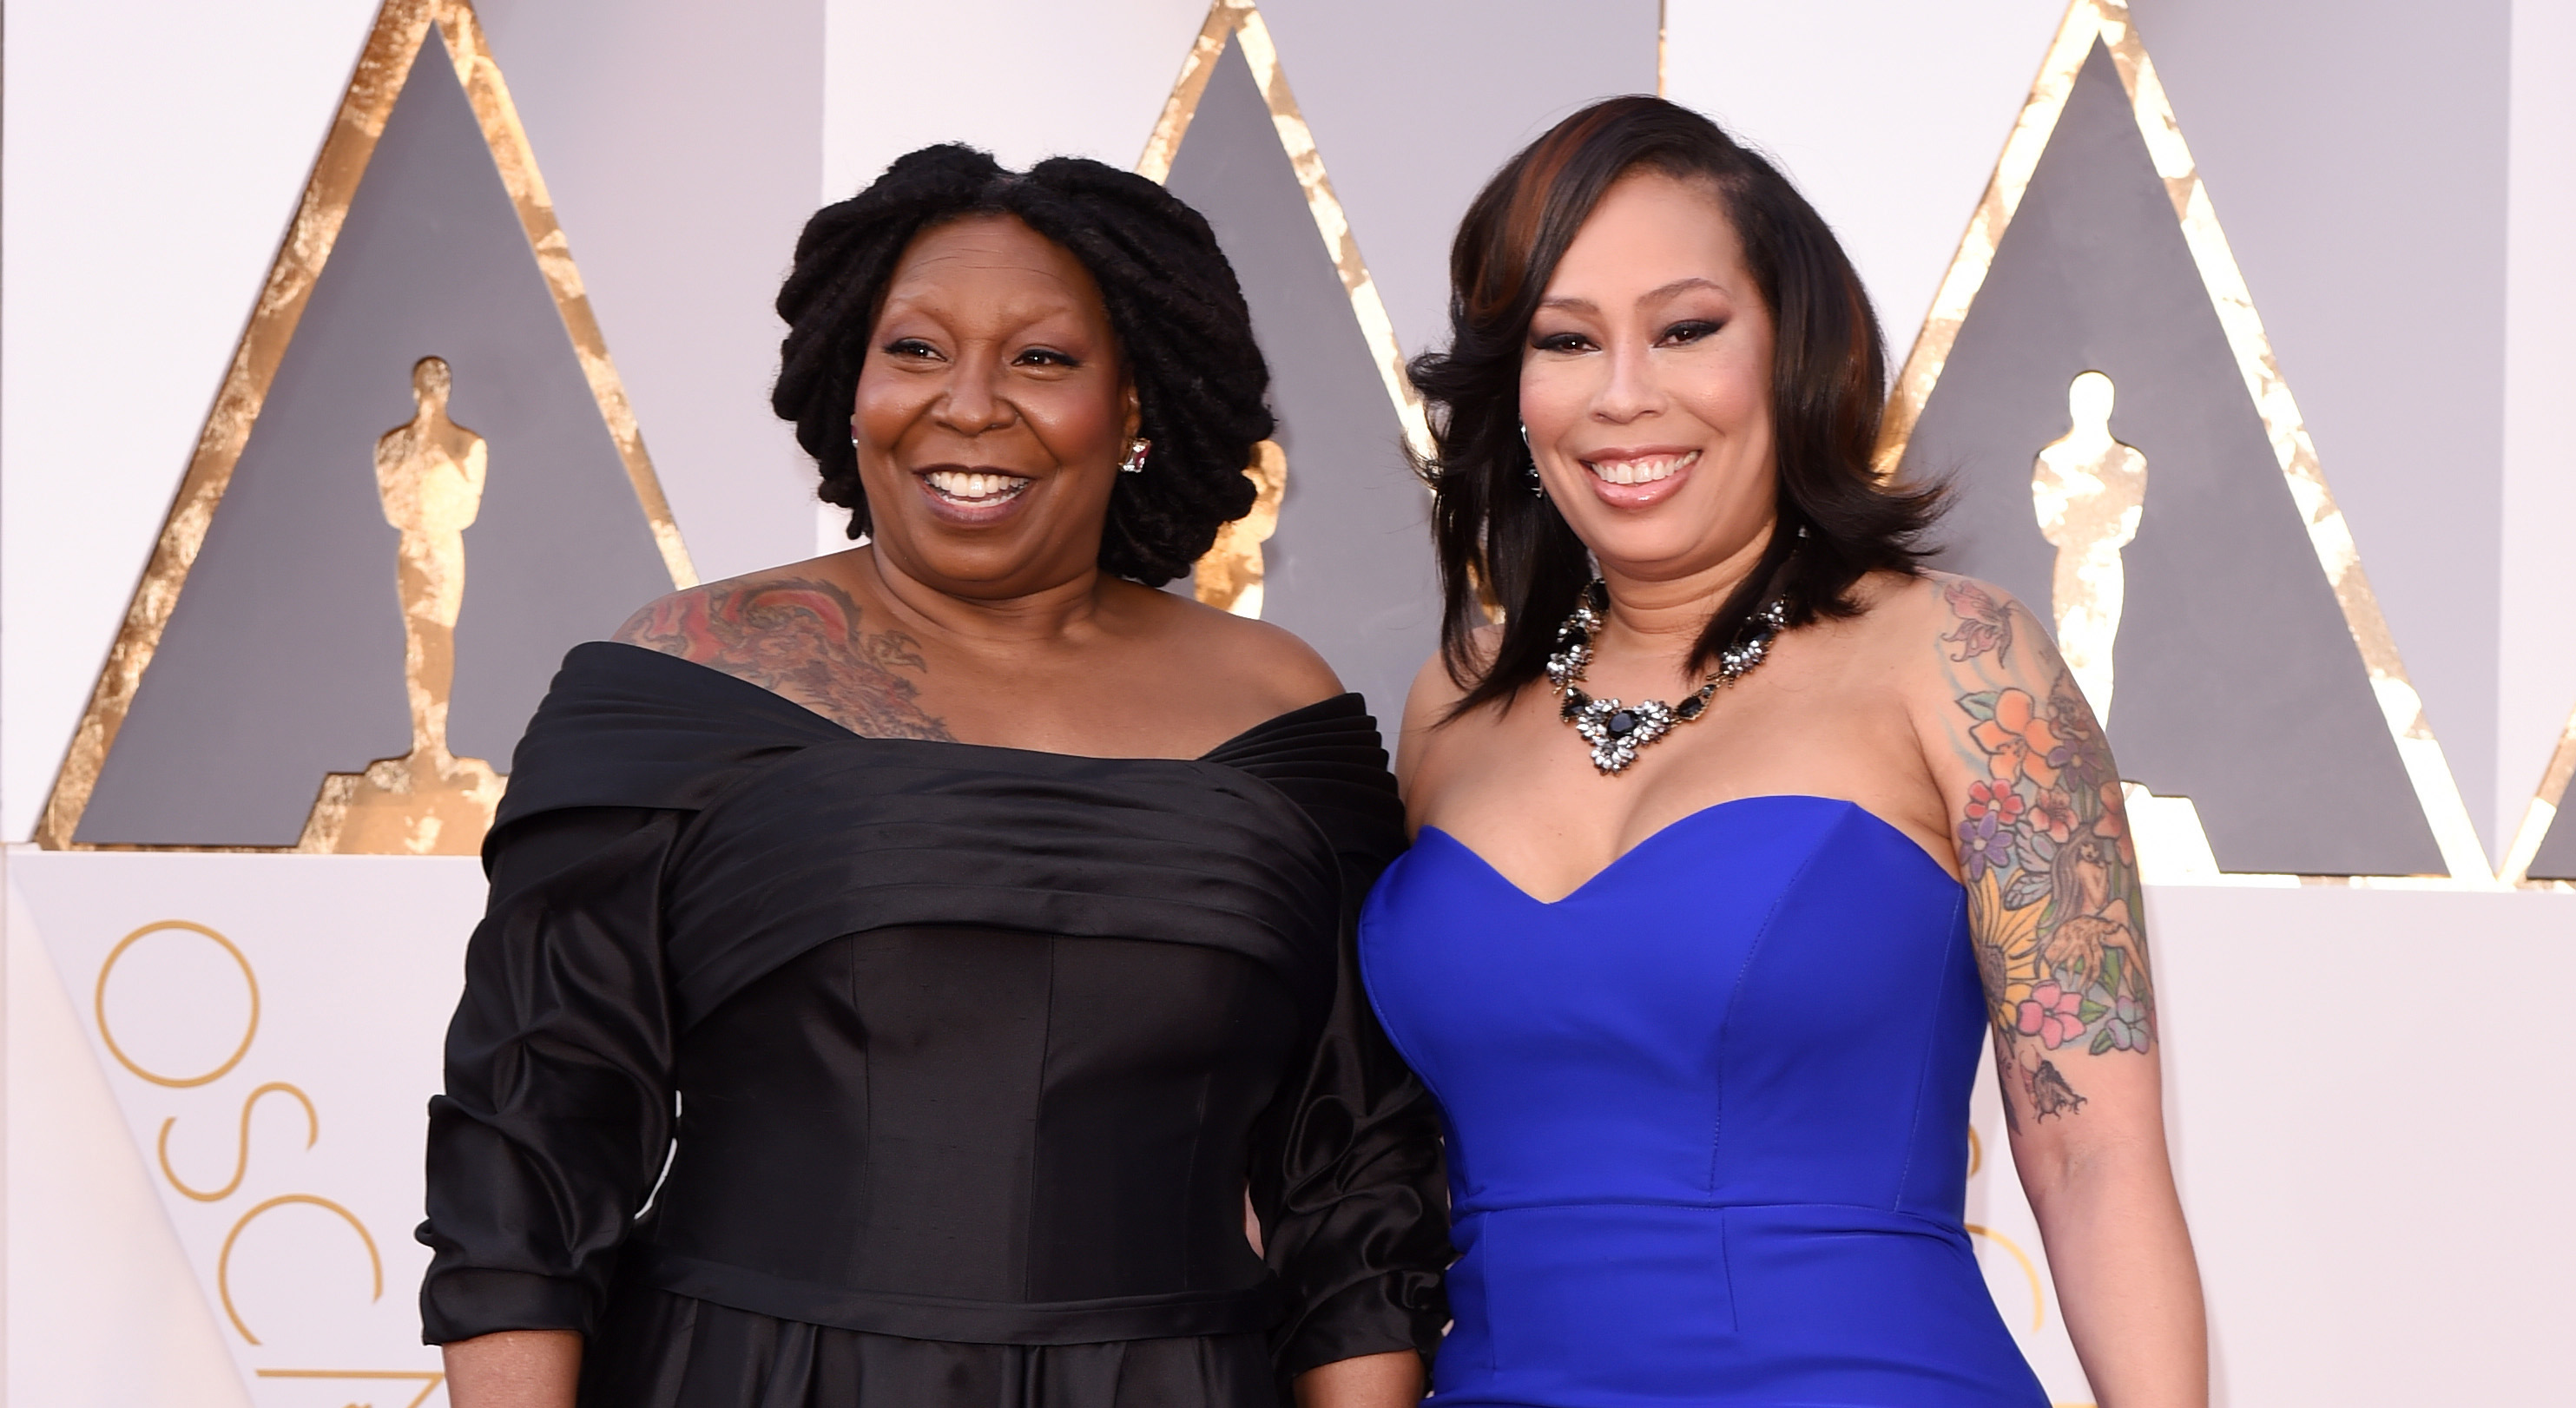 ABC Declines to Renew Whoopi Goldberg’s Contract: “It’s Time to Move On ...